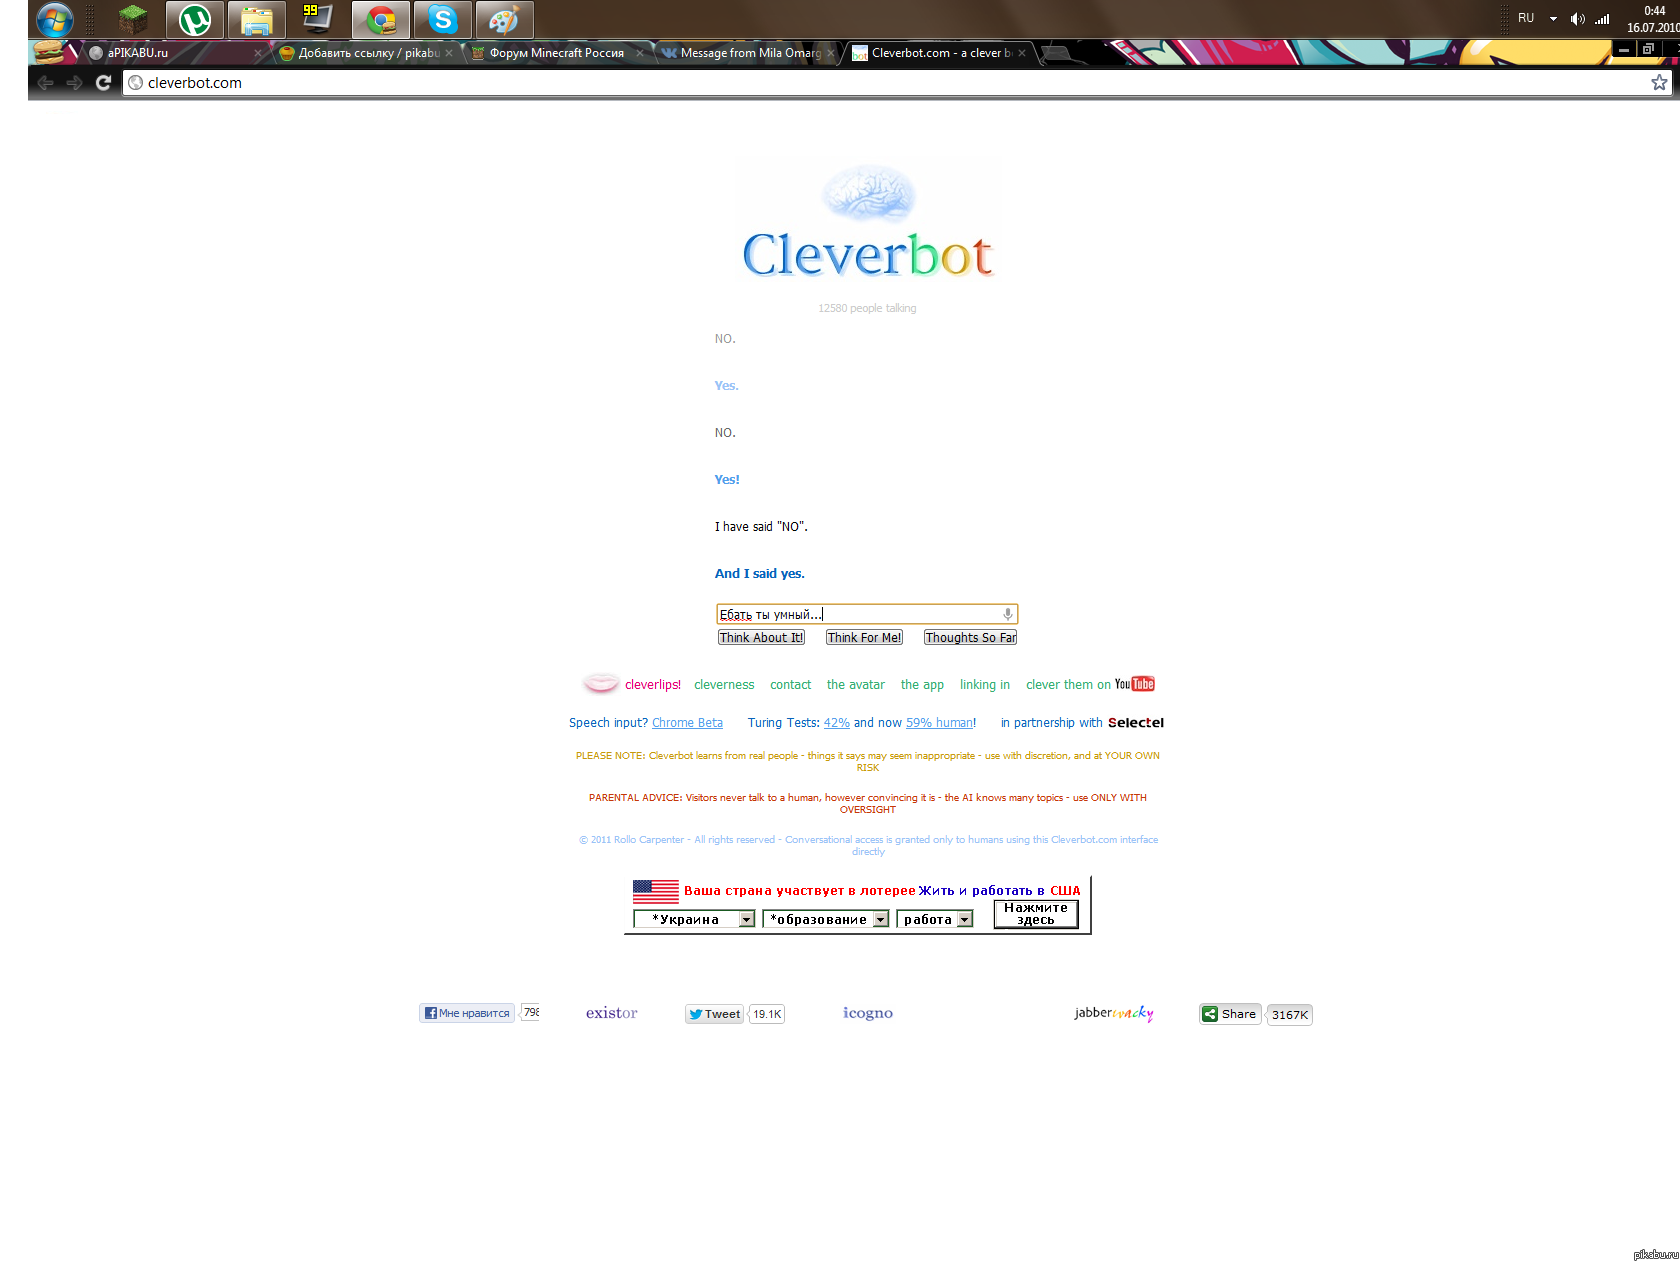    Cleverbot.        .   ...